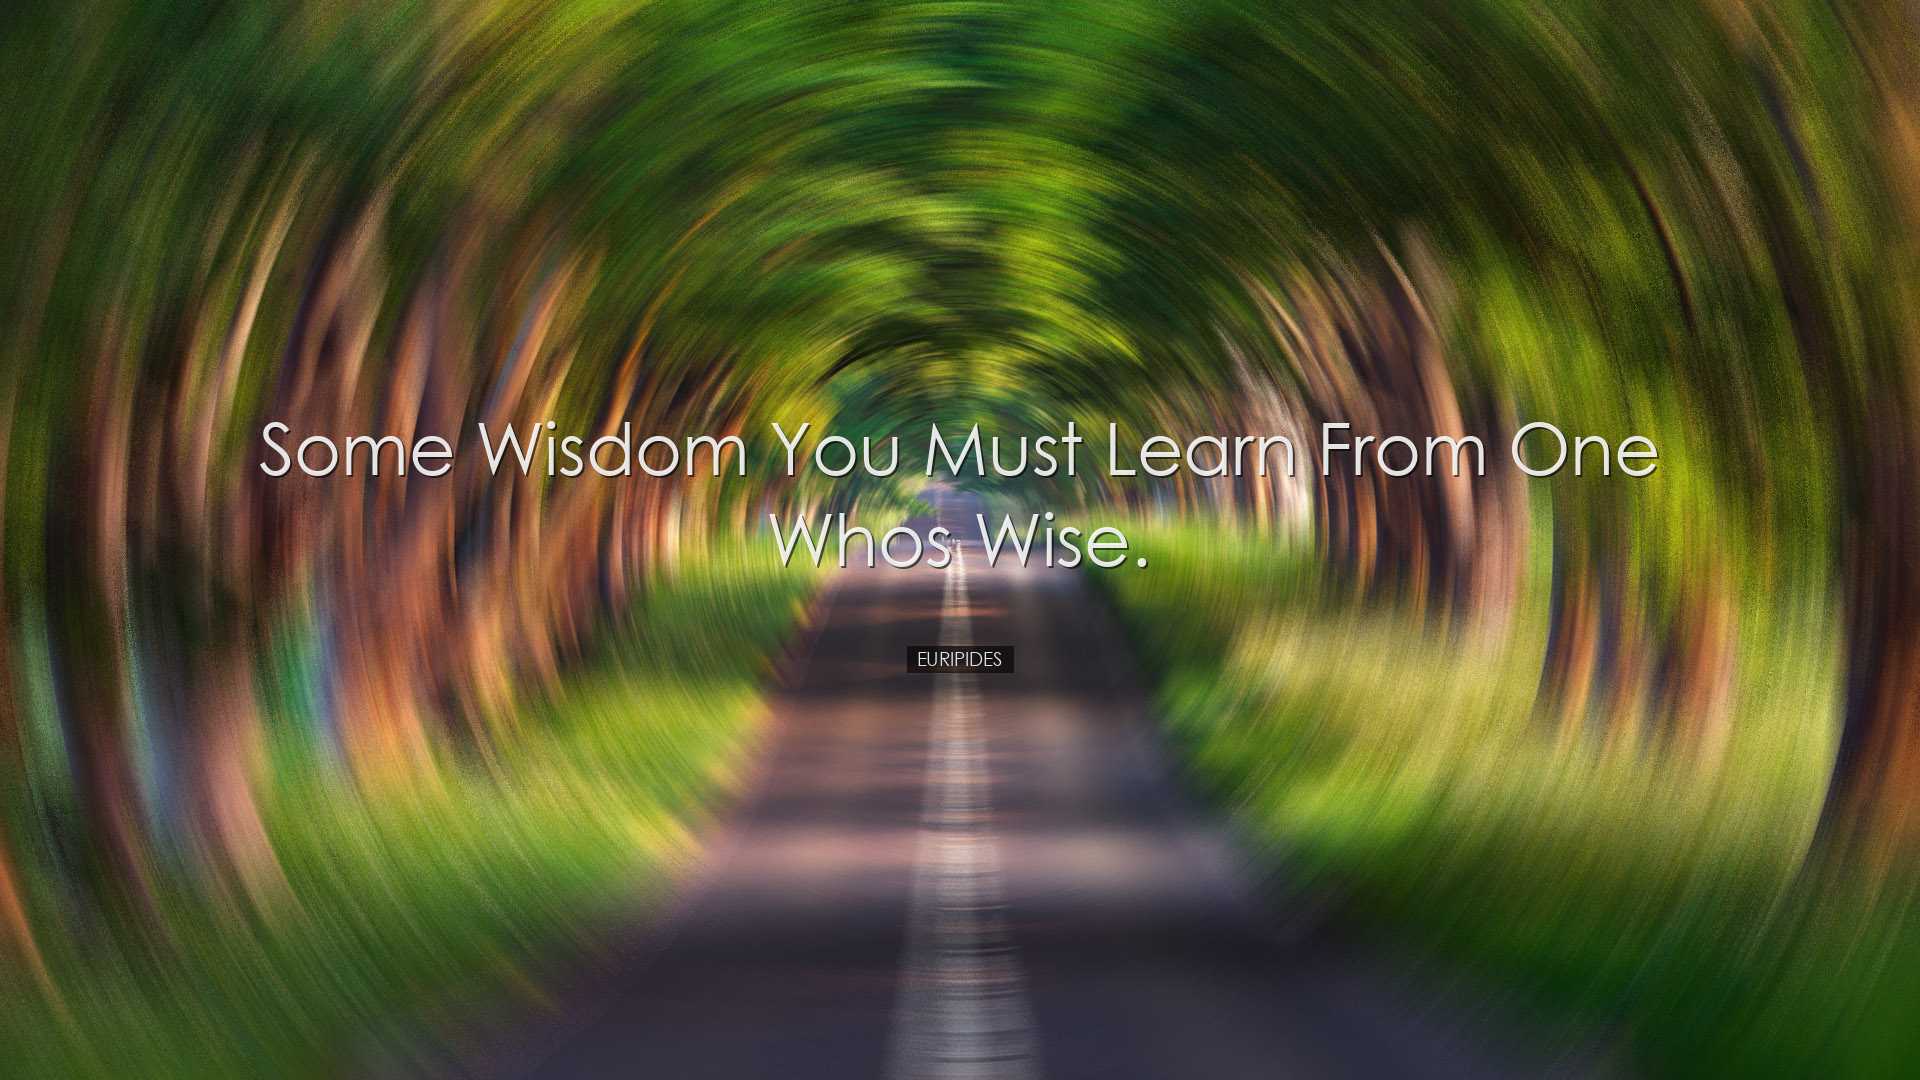 Some wisdom you must learn from one whos wise. - Euripides